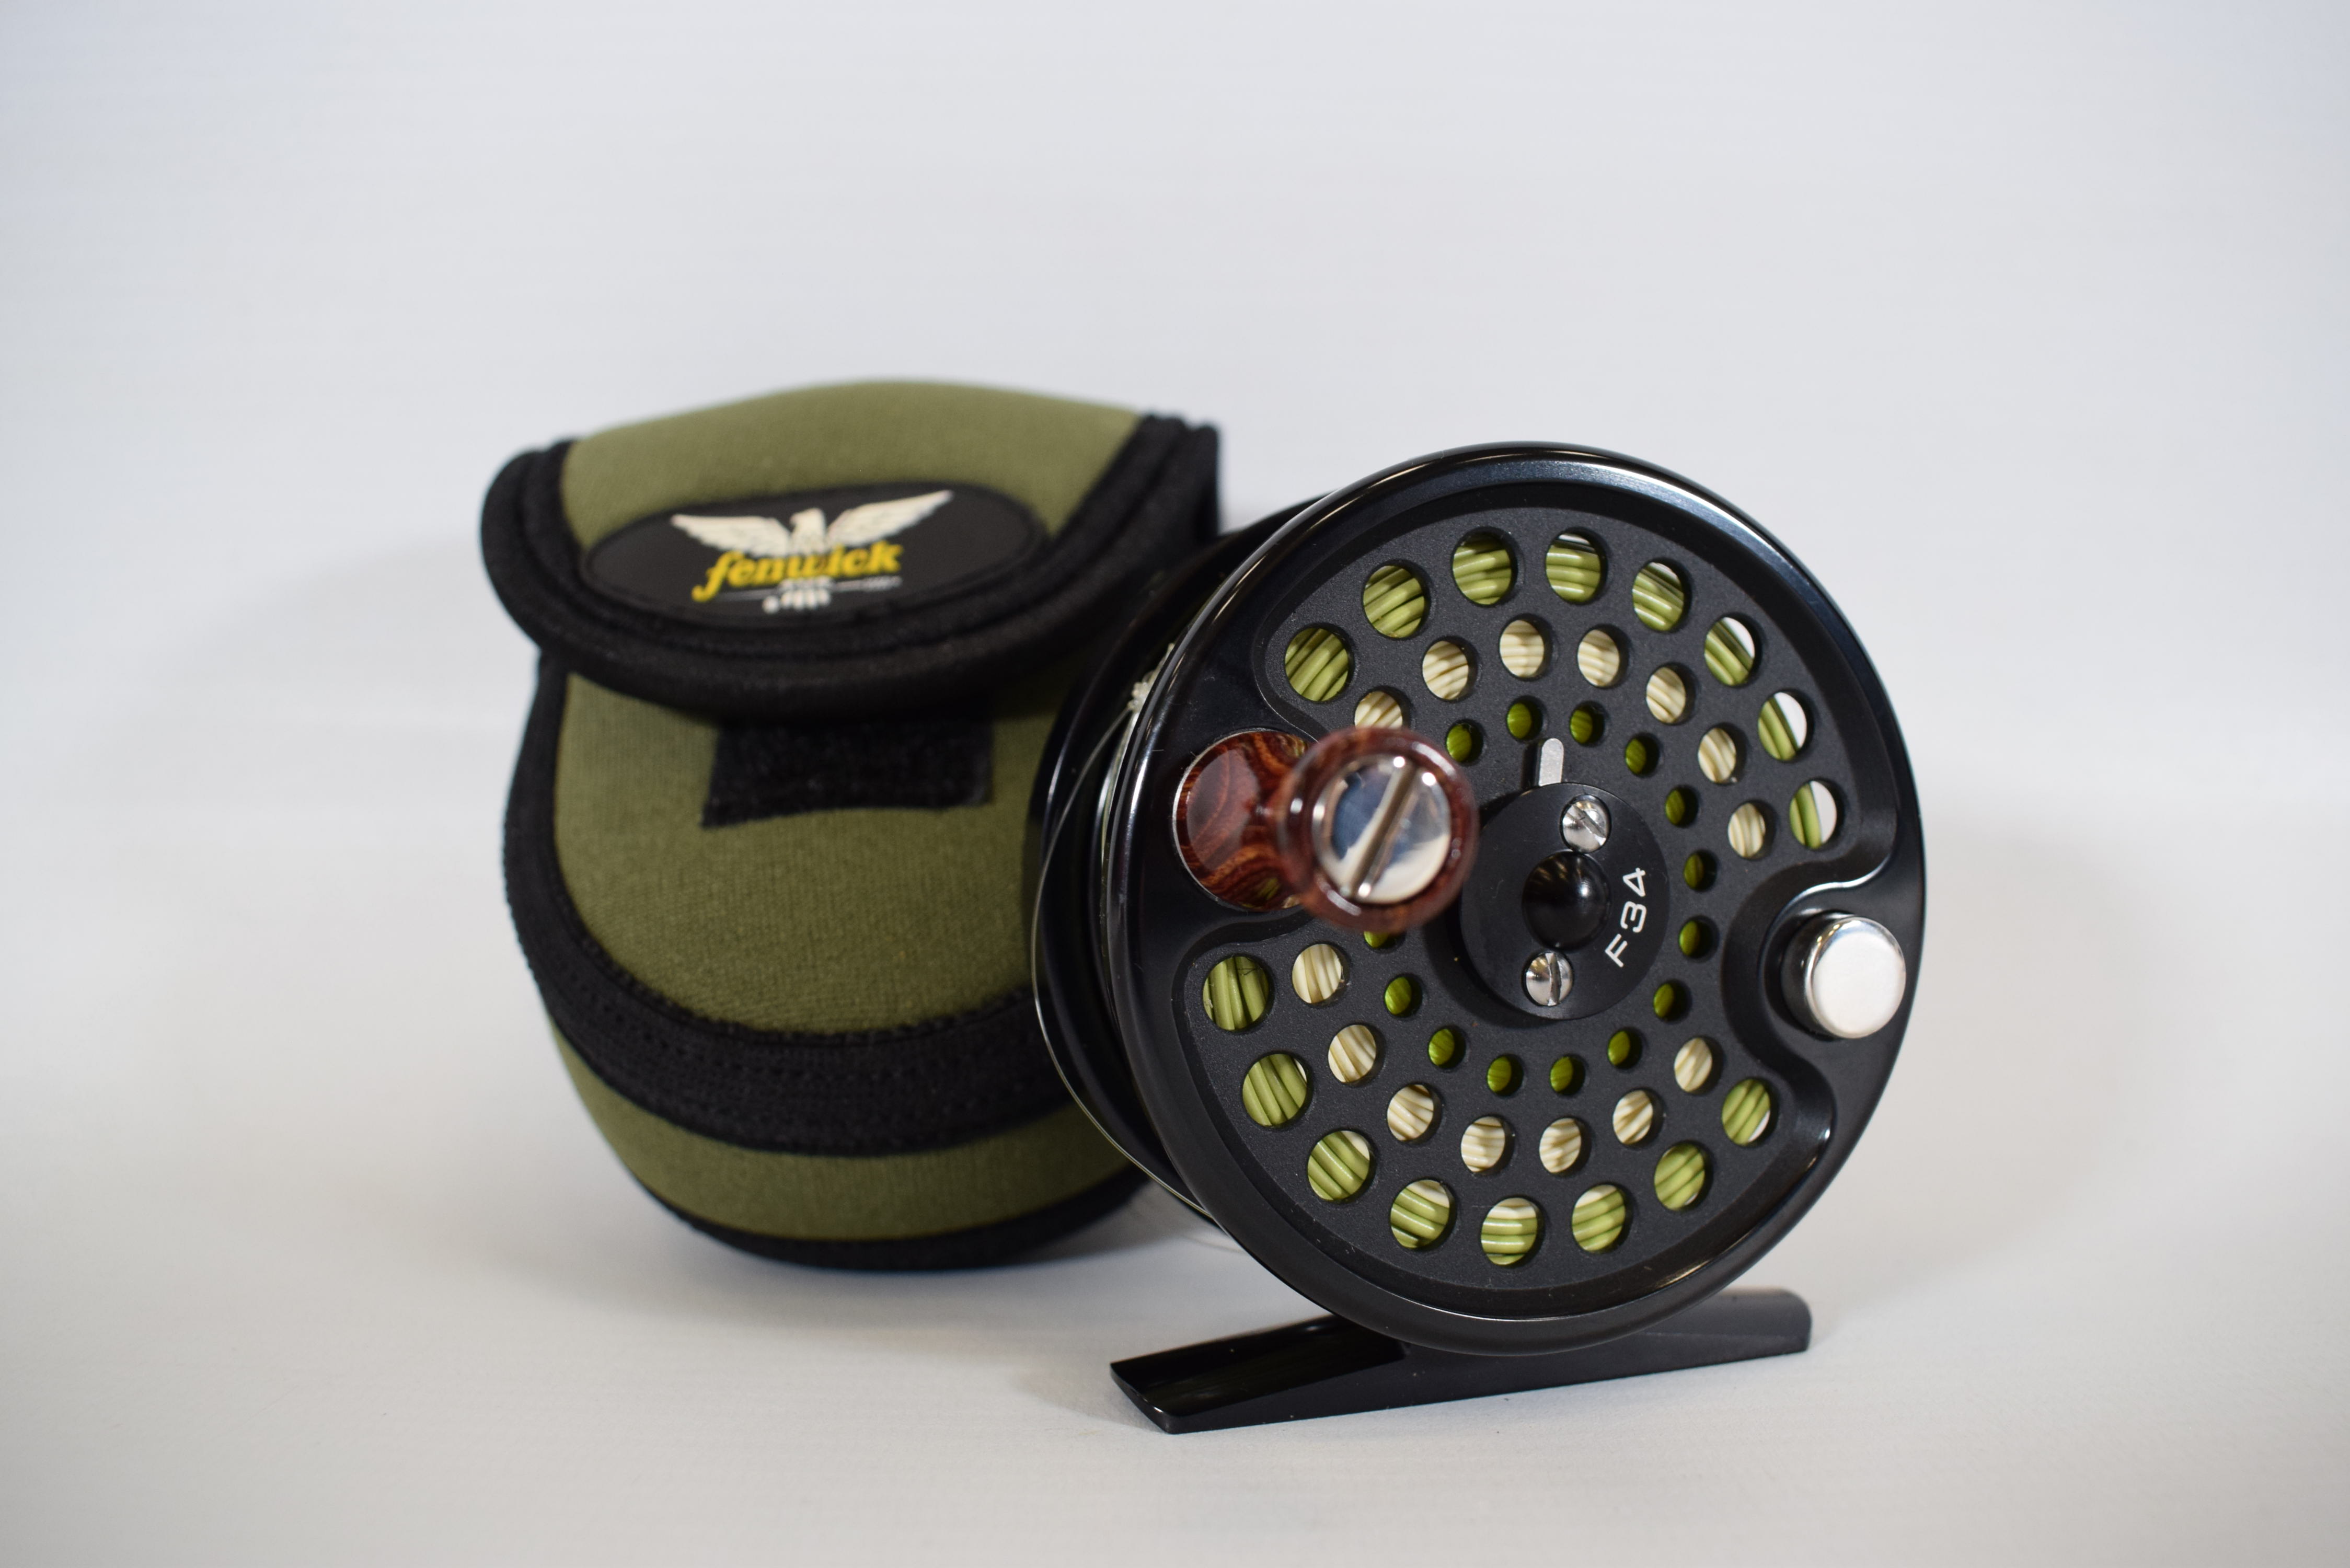 Fenwick fly reel F34 with soft pouch.  